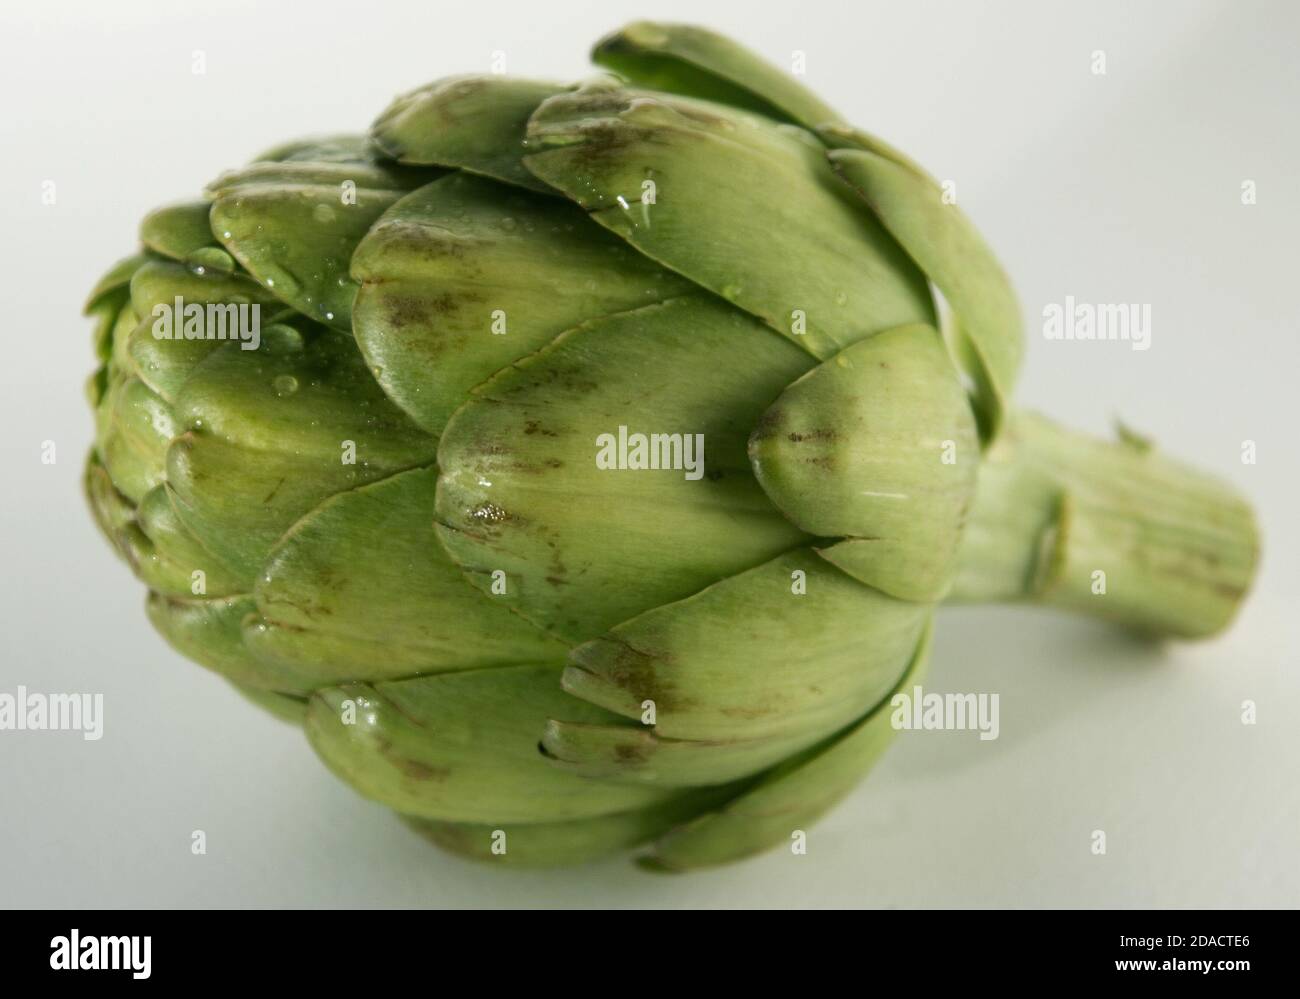 Green artichoke with water droplets on white background. Stock Photo